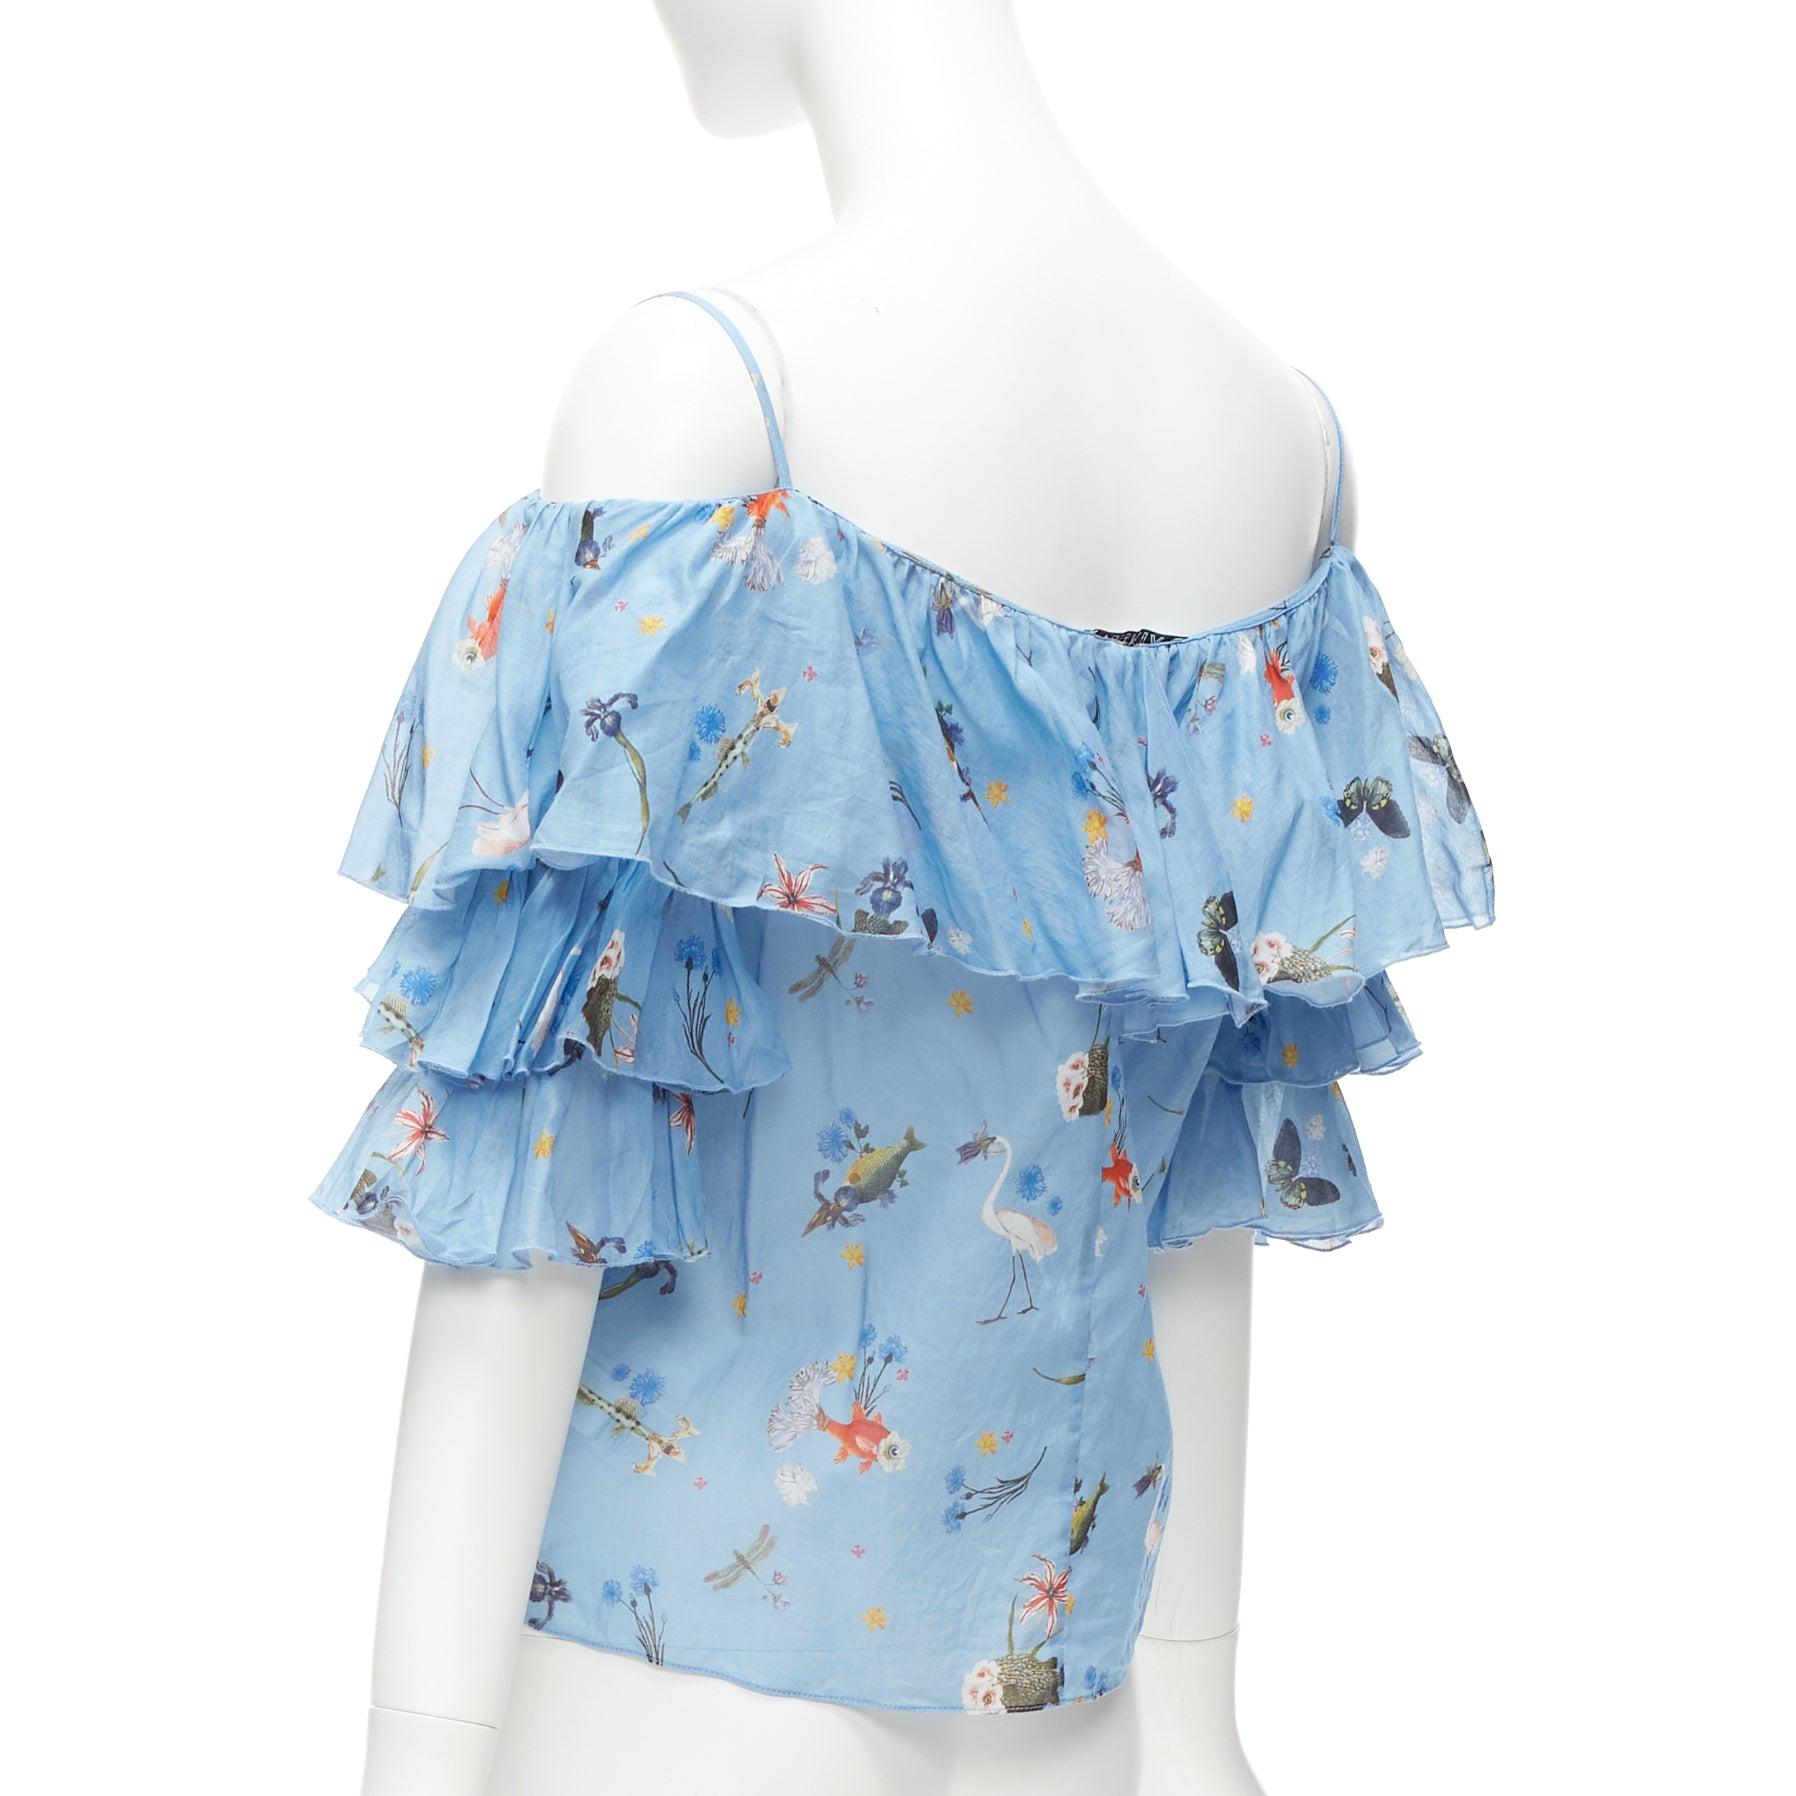 VIVETTA blue cotton animal floral print tiered bell sleeves strappy top IT40 S For Sale 2